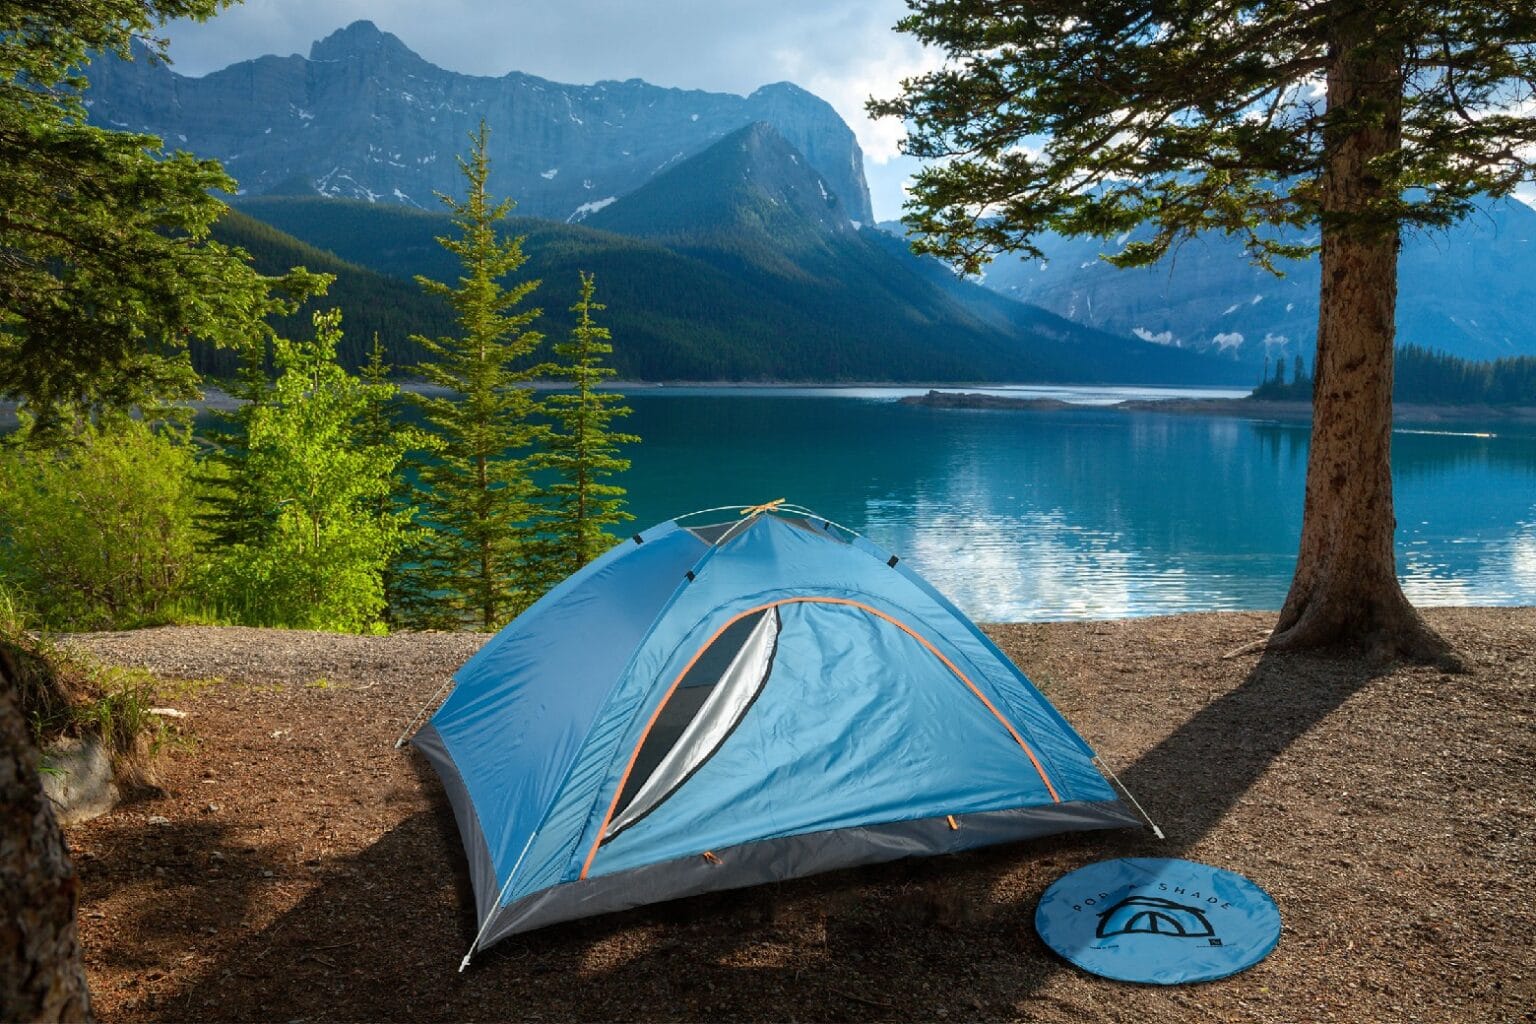 Outdoor techies will love this $28 pop-up tent.